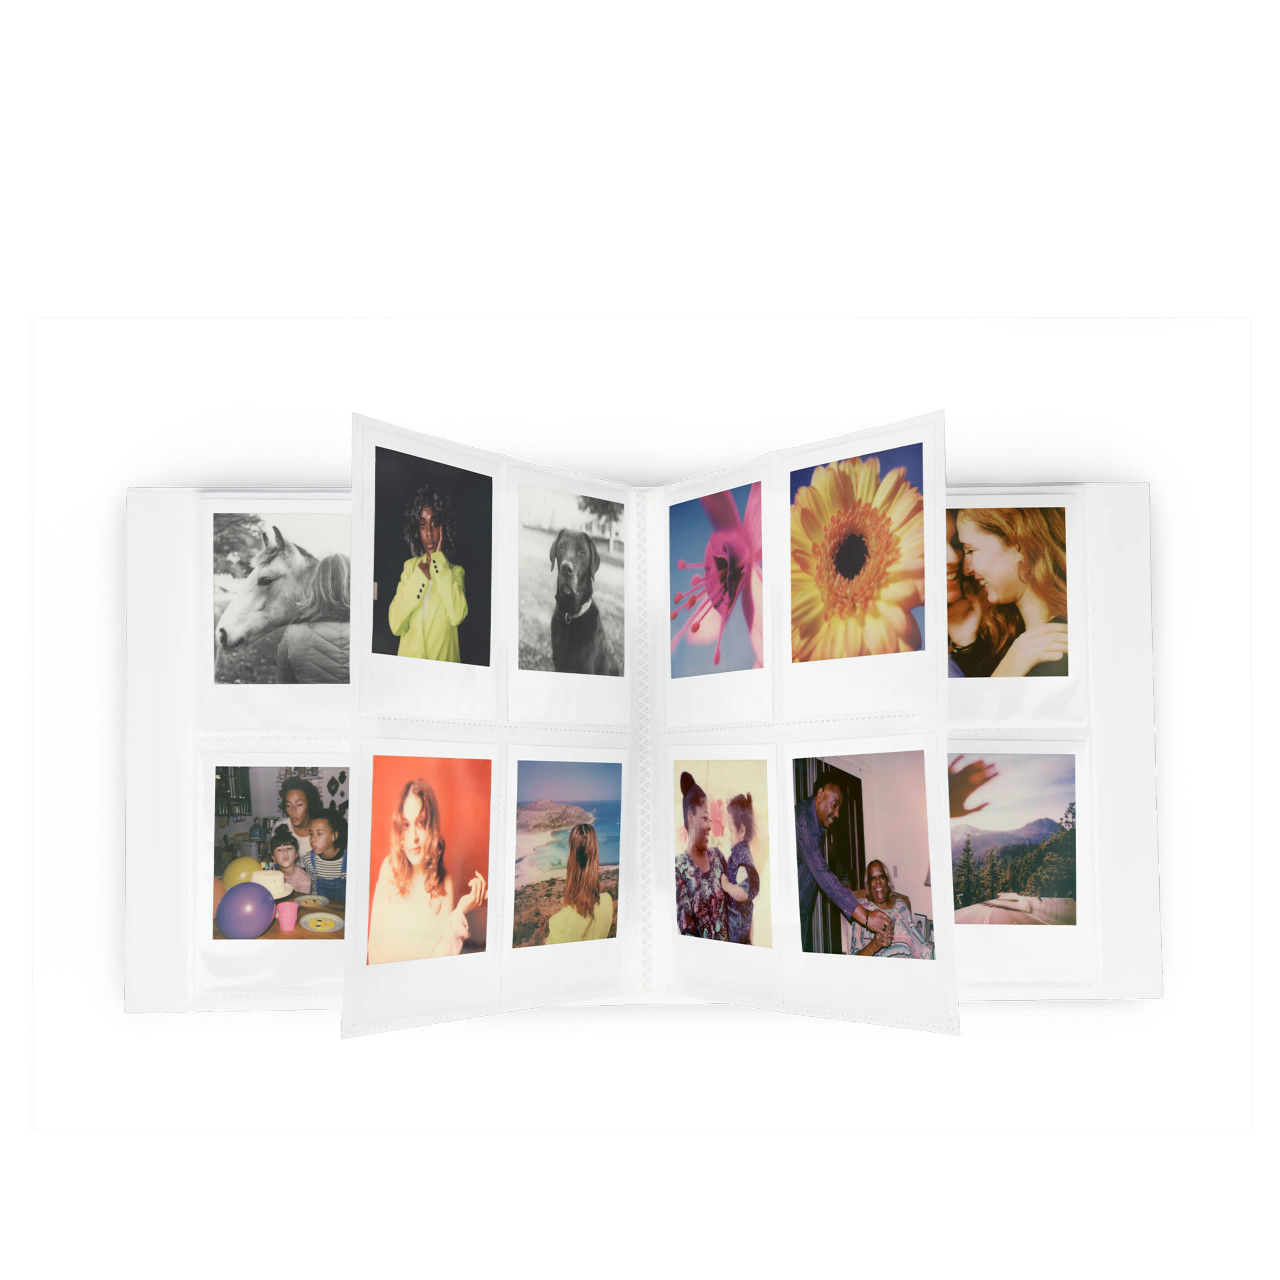 Depicted is an open view of the large white Polaroid photo album.